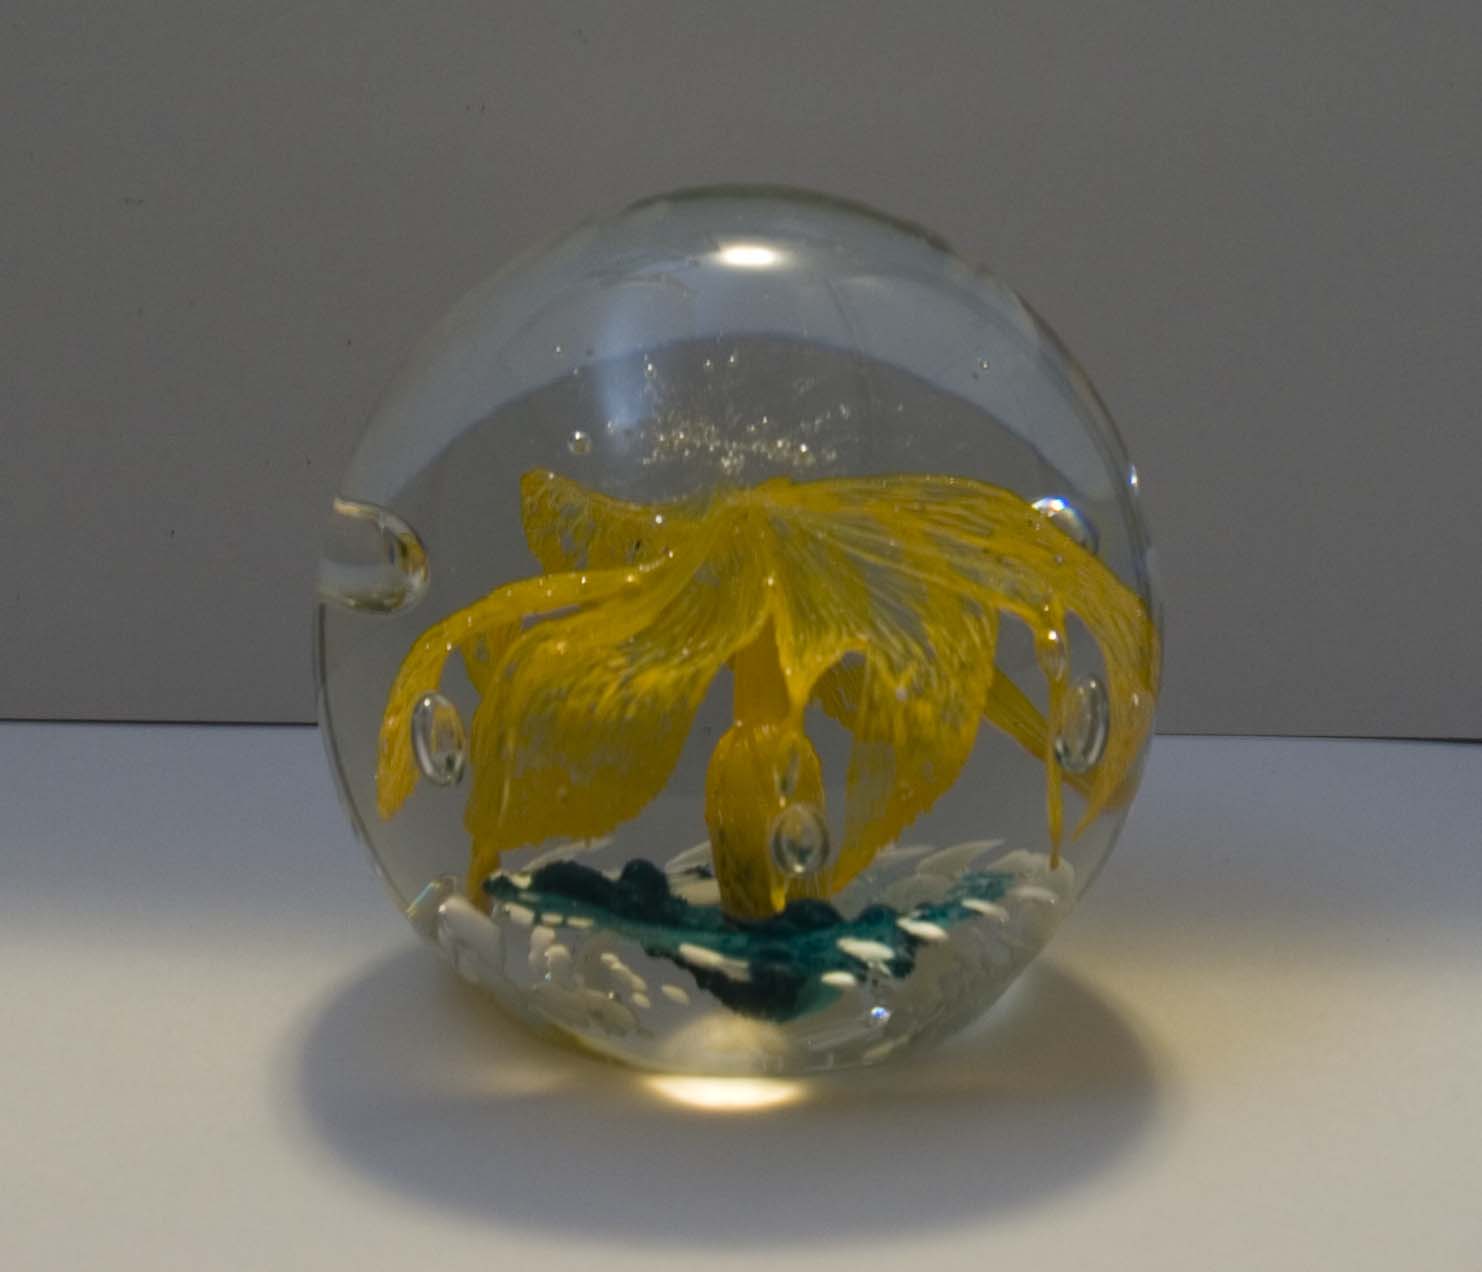 1984 glass paperweight symbol